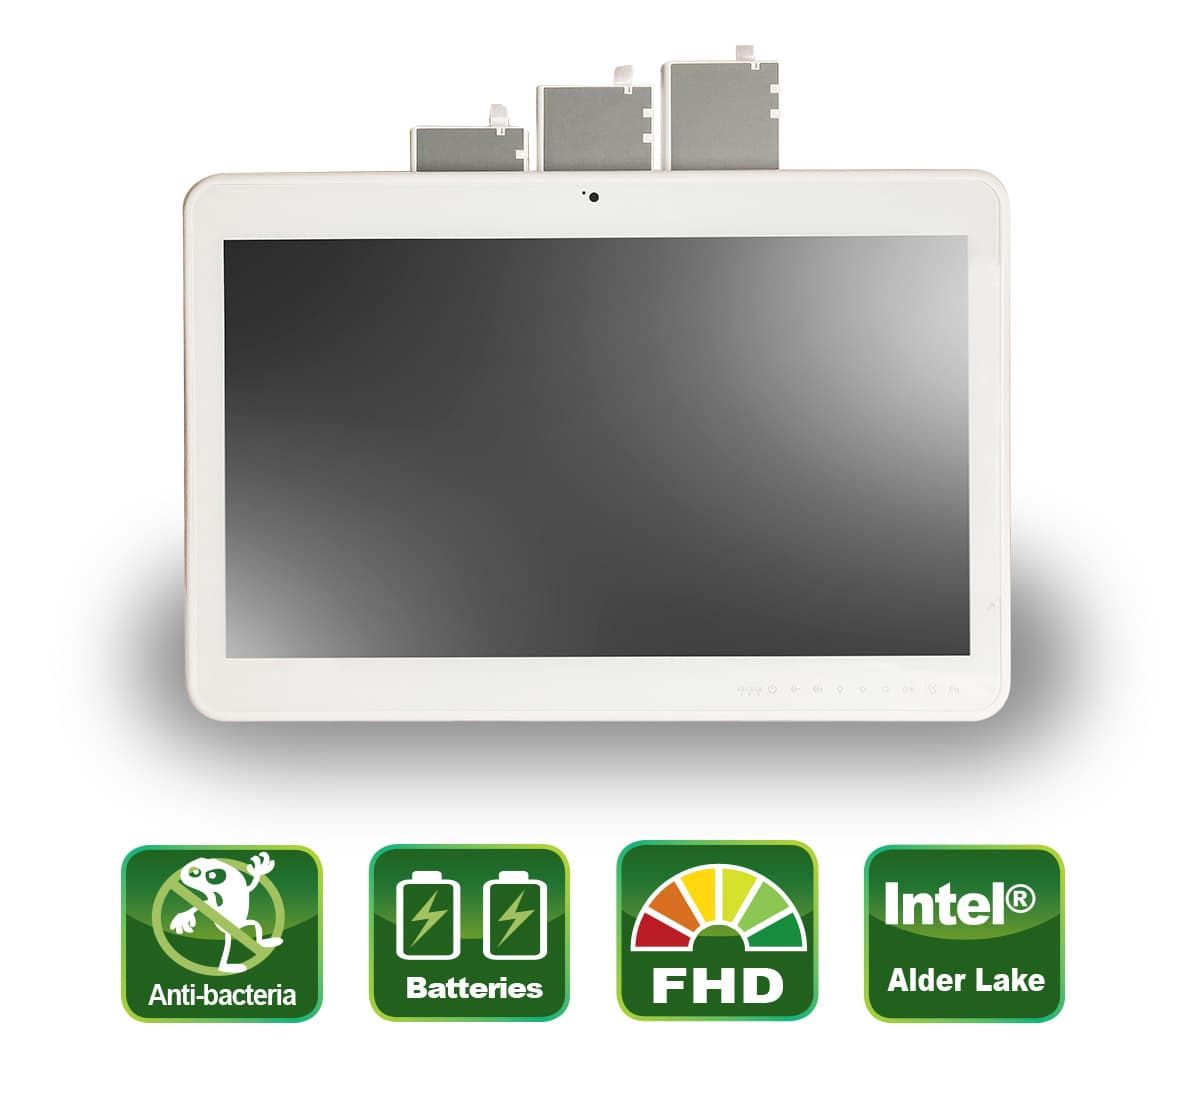 WMP-24P – Medical All-in-One PC with Alder Lake CPU